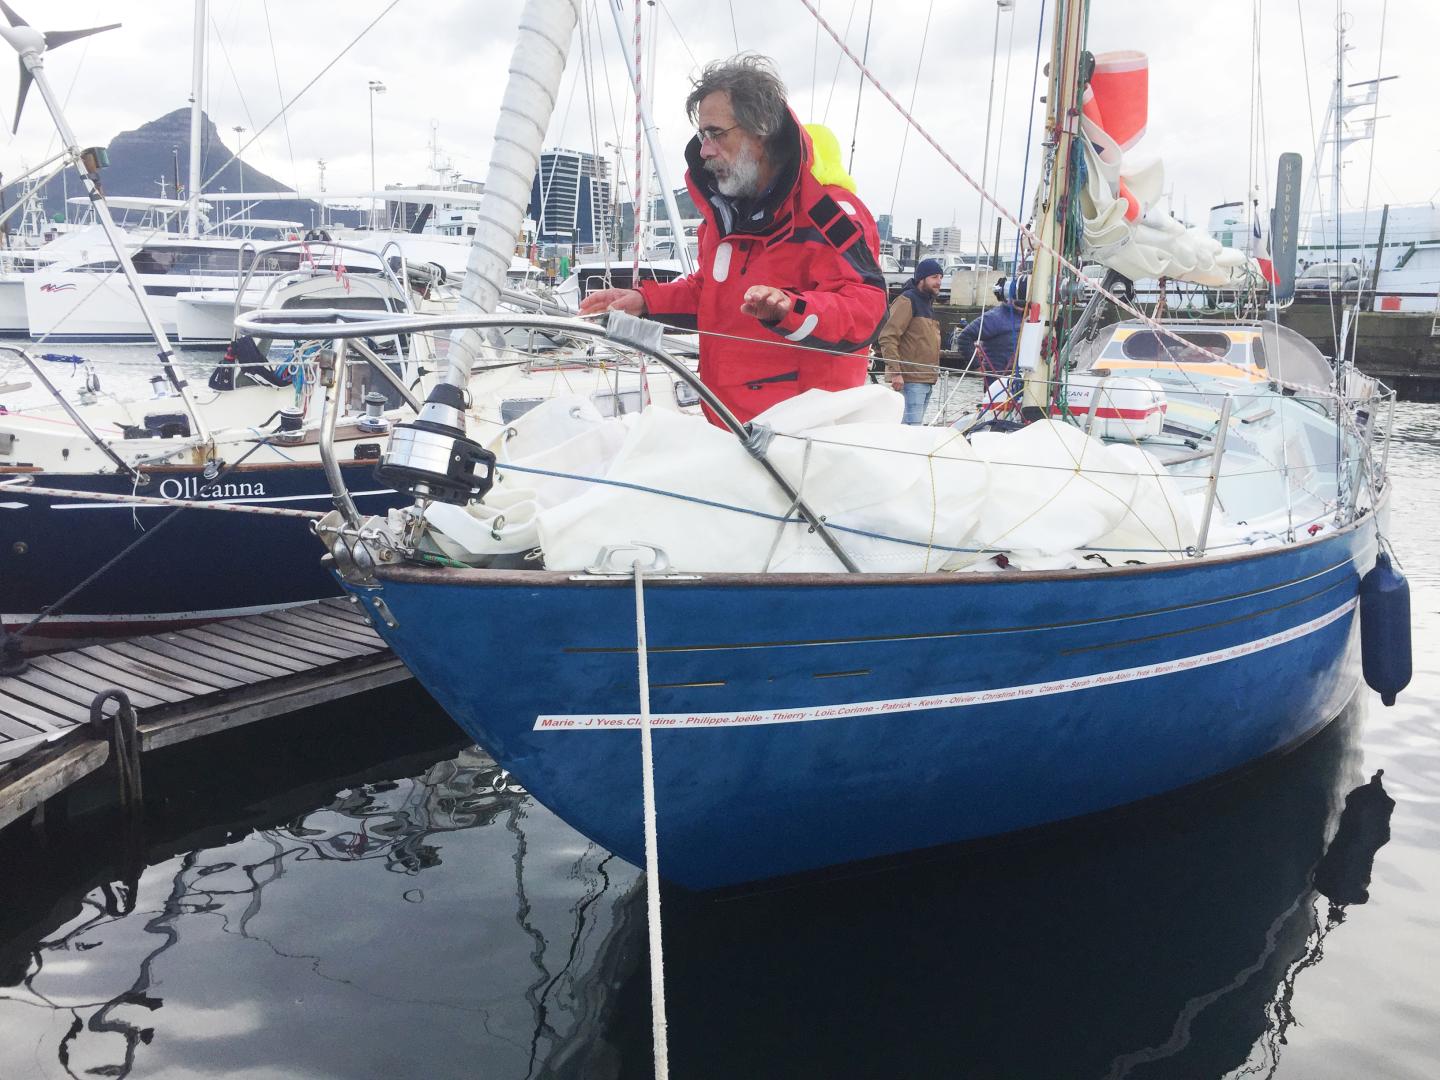 Loïc Lepage, arrived in Cape Town last Saturday and is now in the Chichester Class